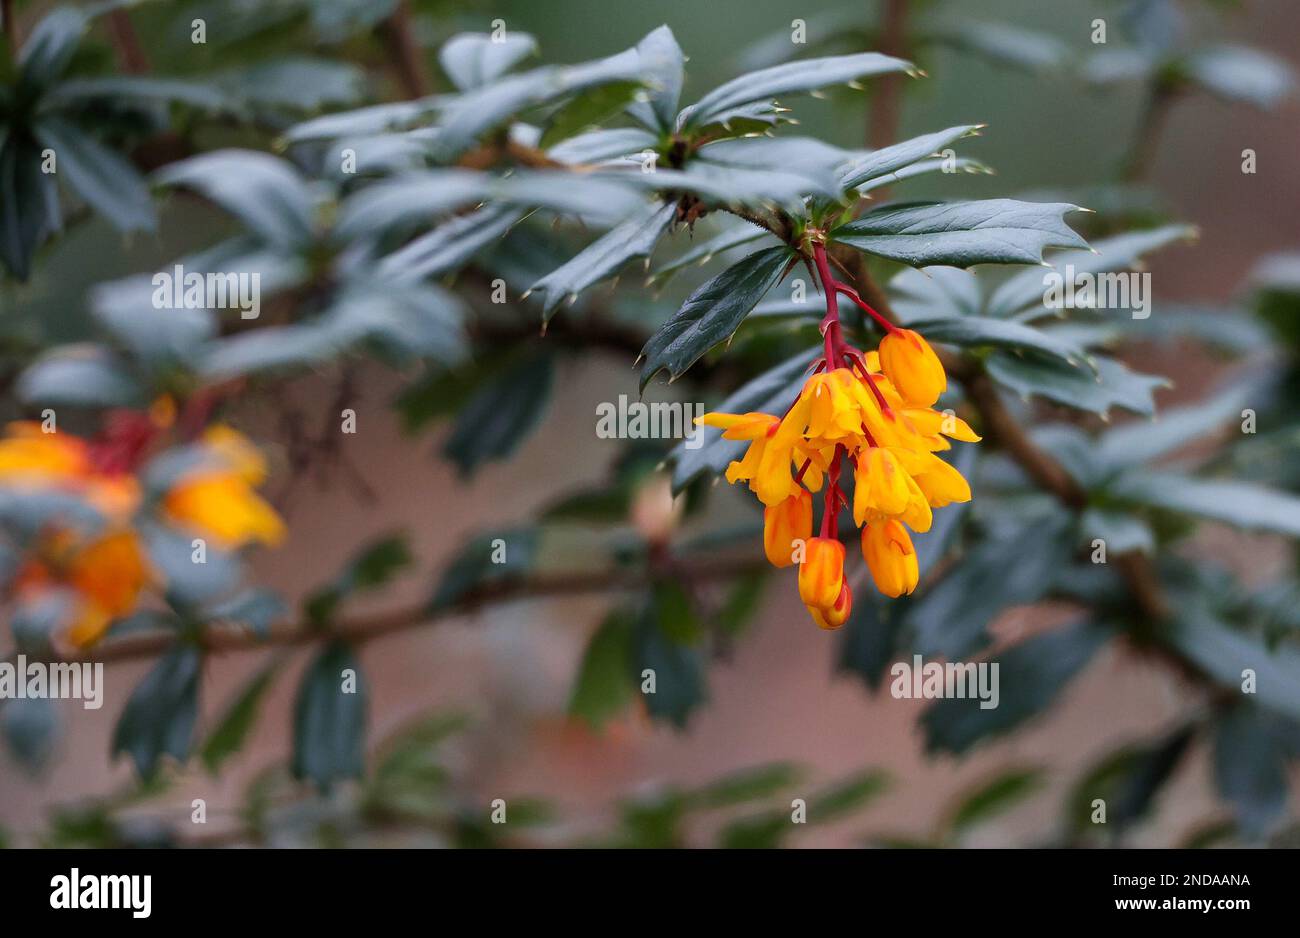 Belfast, Northern Ireland, UK, 15 Feb 2023. UK weather – another grey dull day with a cool breeze. An oragne flowerhead stands out on a dull grey winter day.  Darwin’s barberry  shrub. (Berberis darwinii). Credit: David Hunter/Alamy Live News. Stock Photo